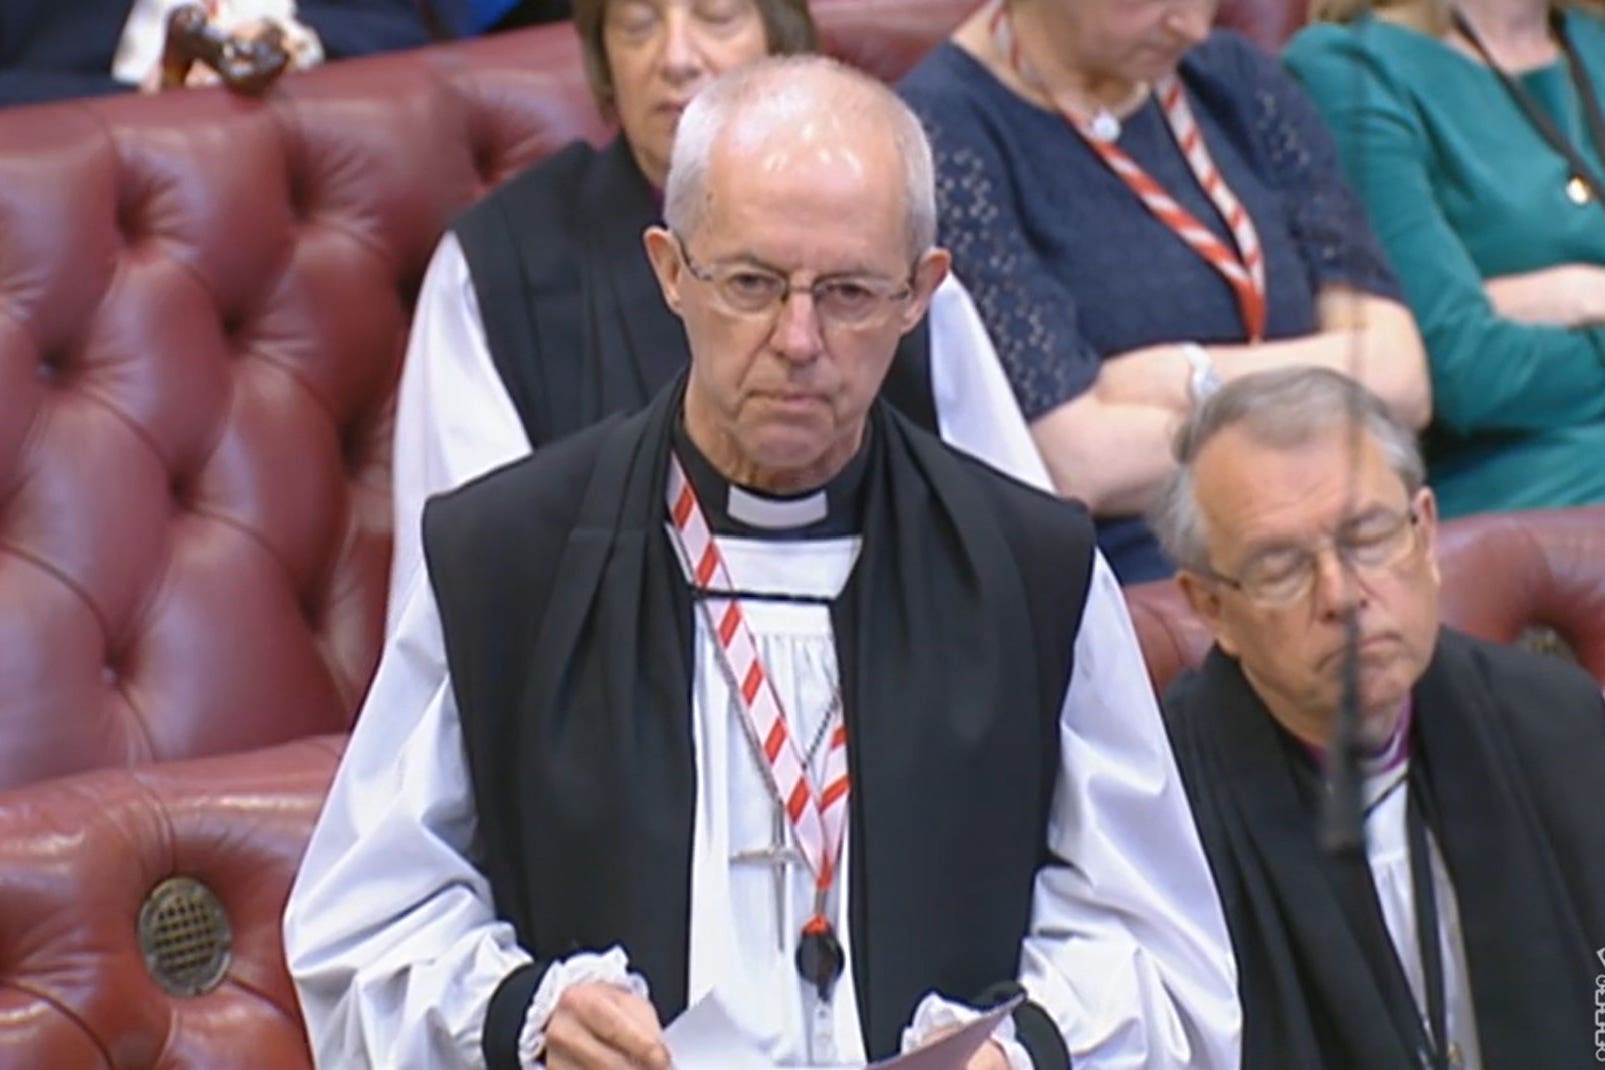 The Archbishop of Canterbury speaking in the House of Lords (House of Lords/UK Parliament)